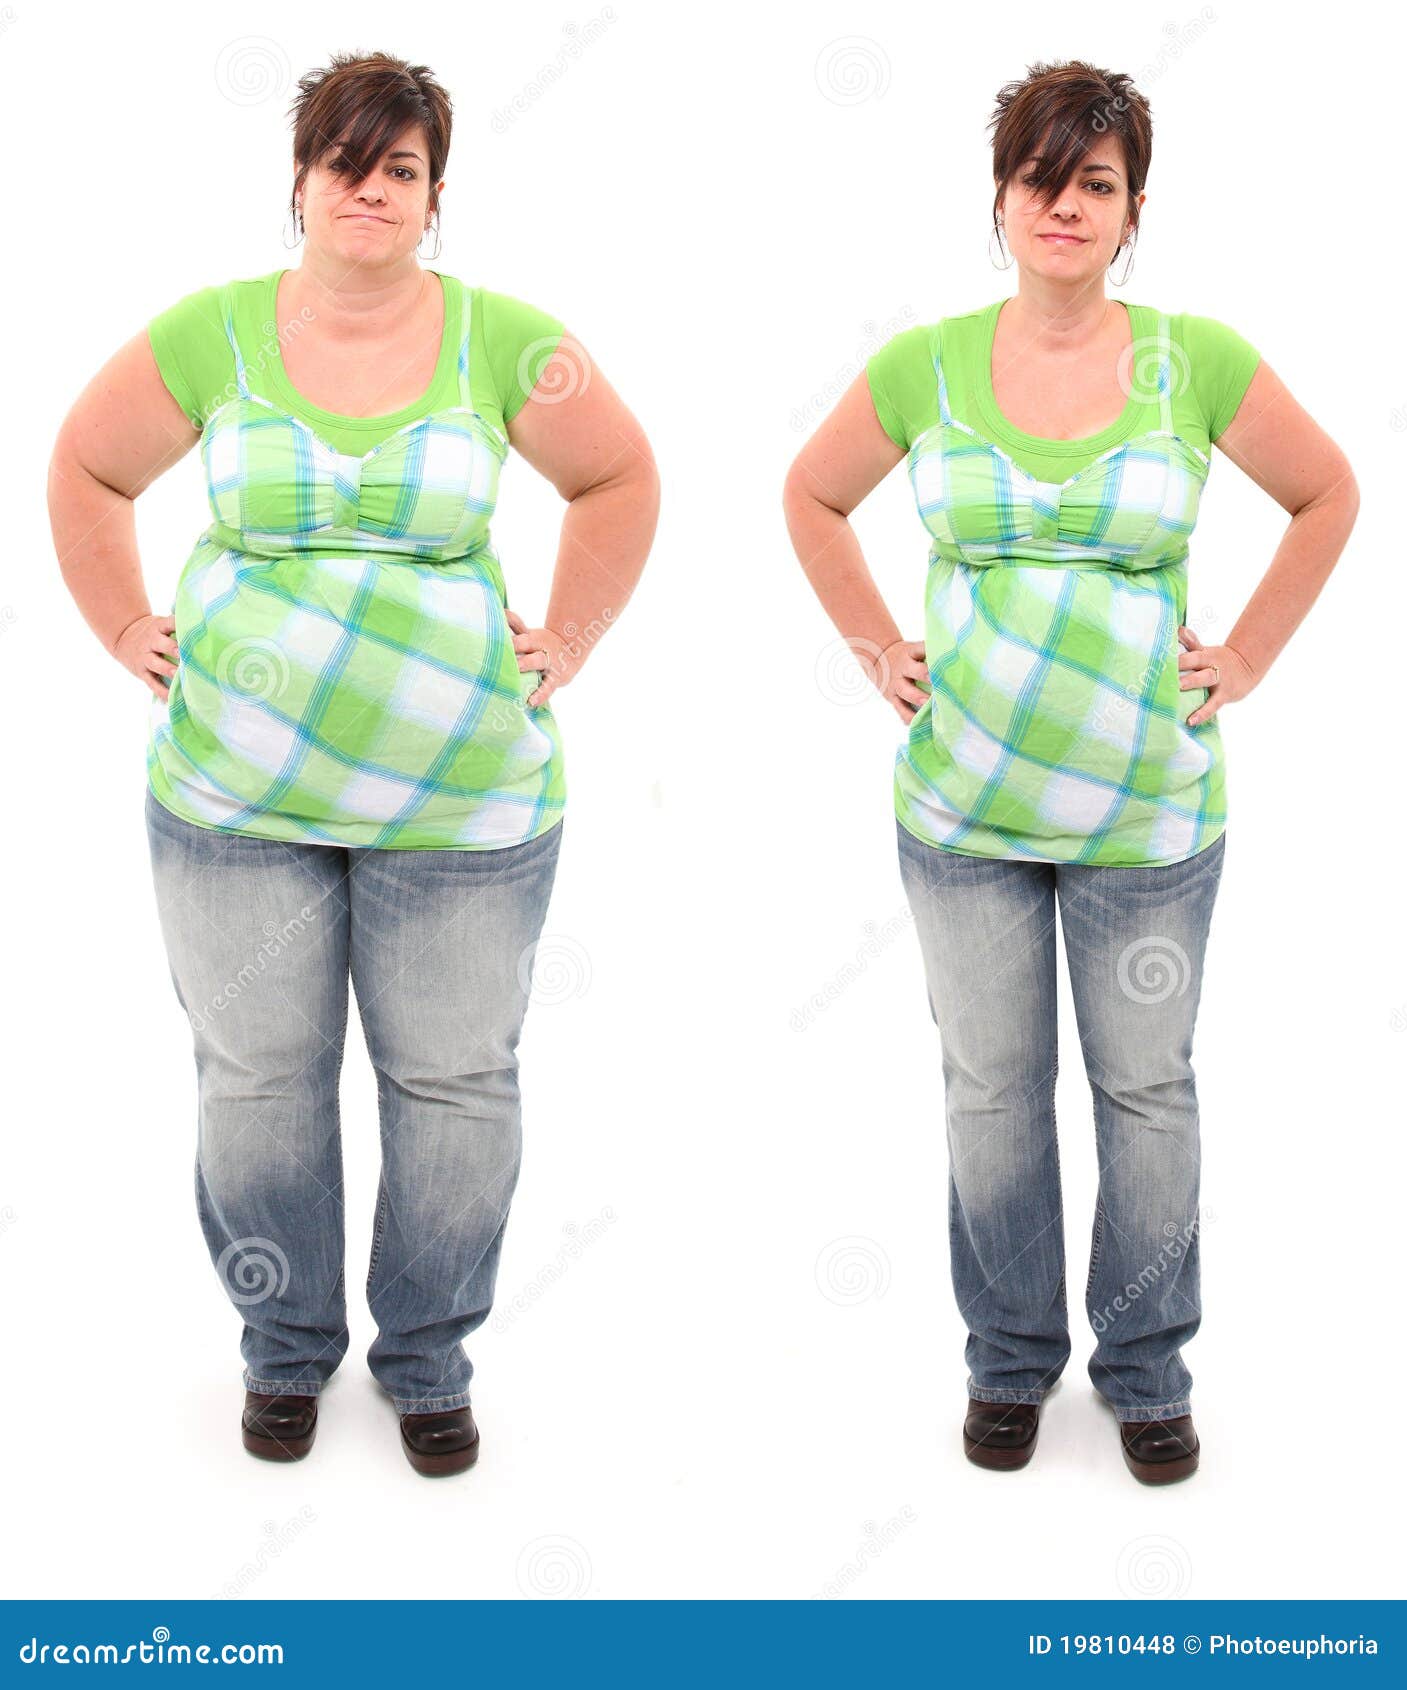 before and after overweight 45 year old woman